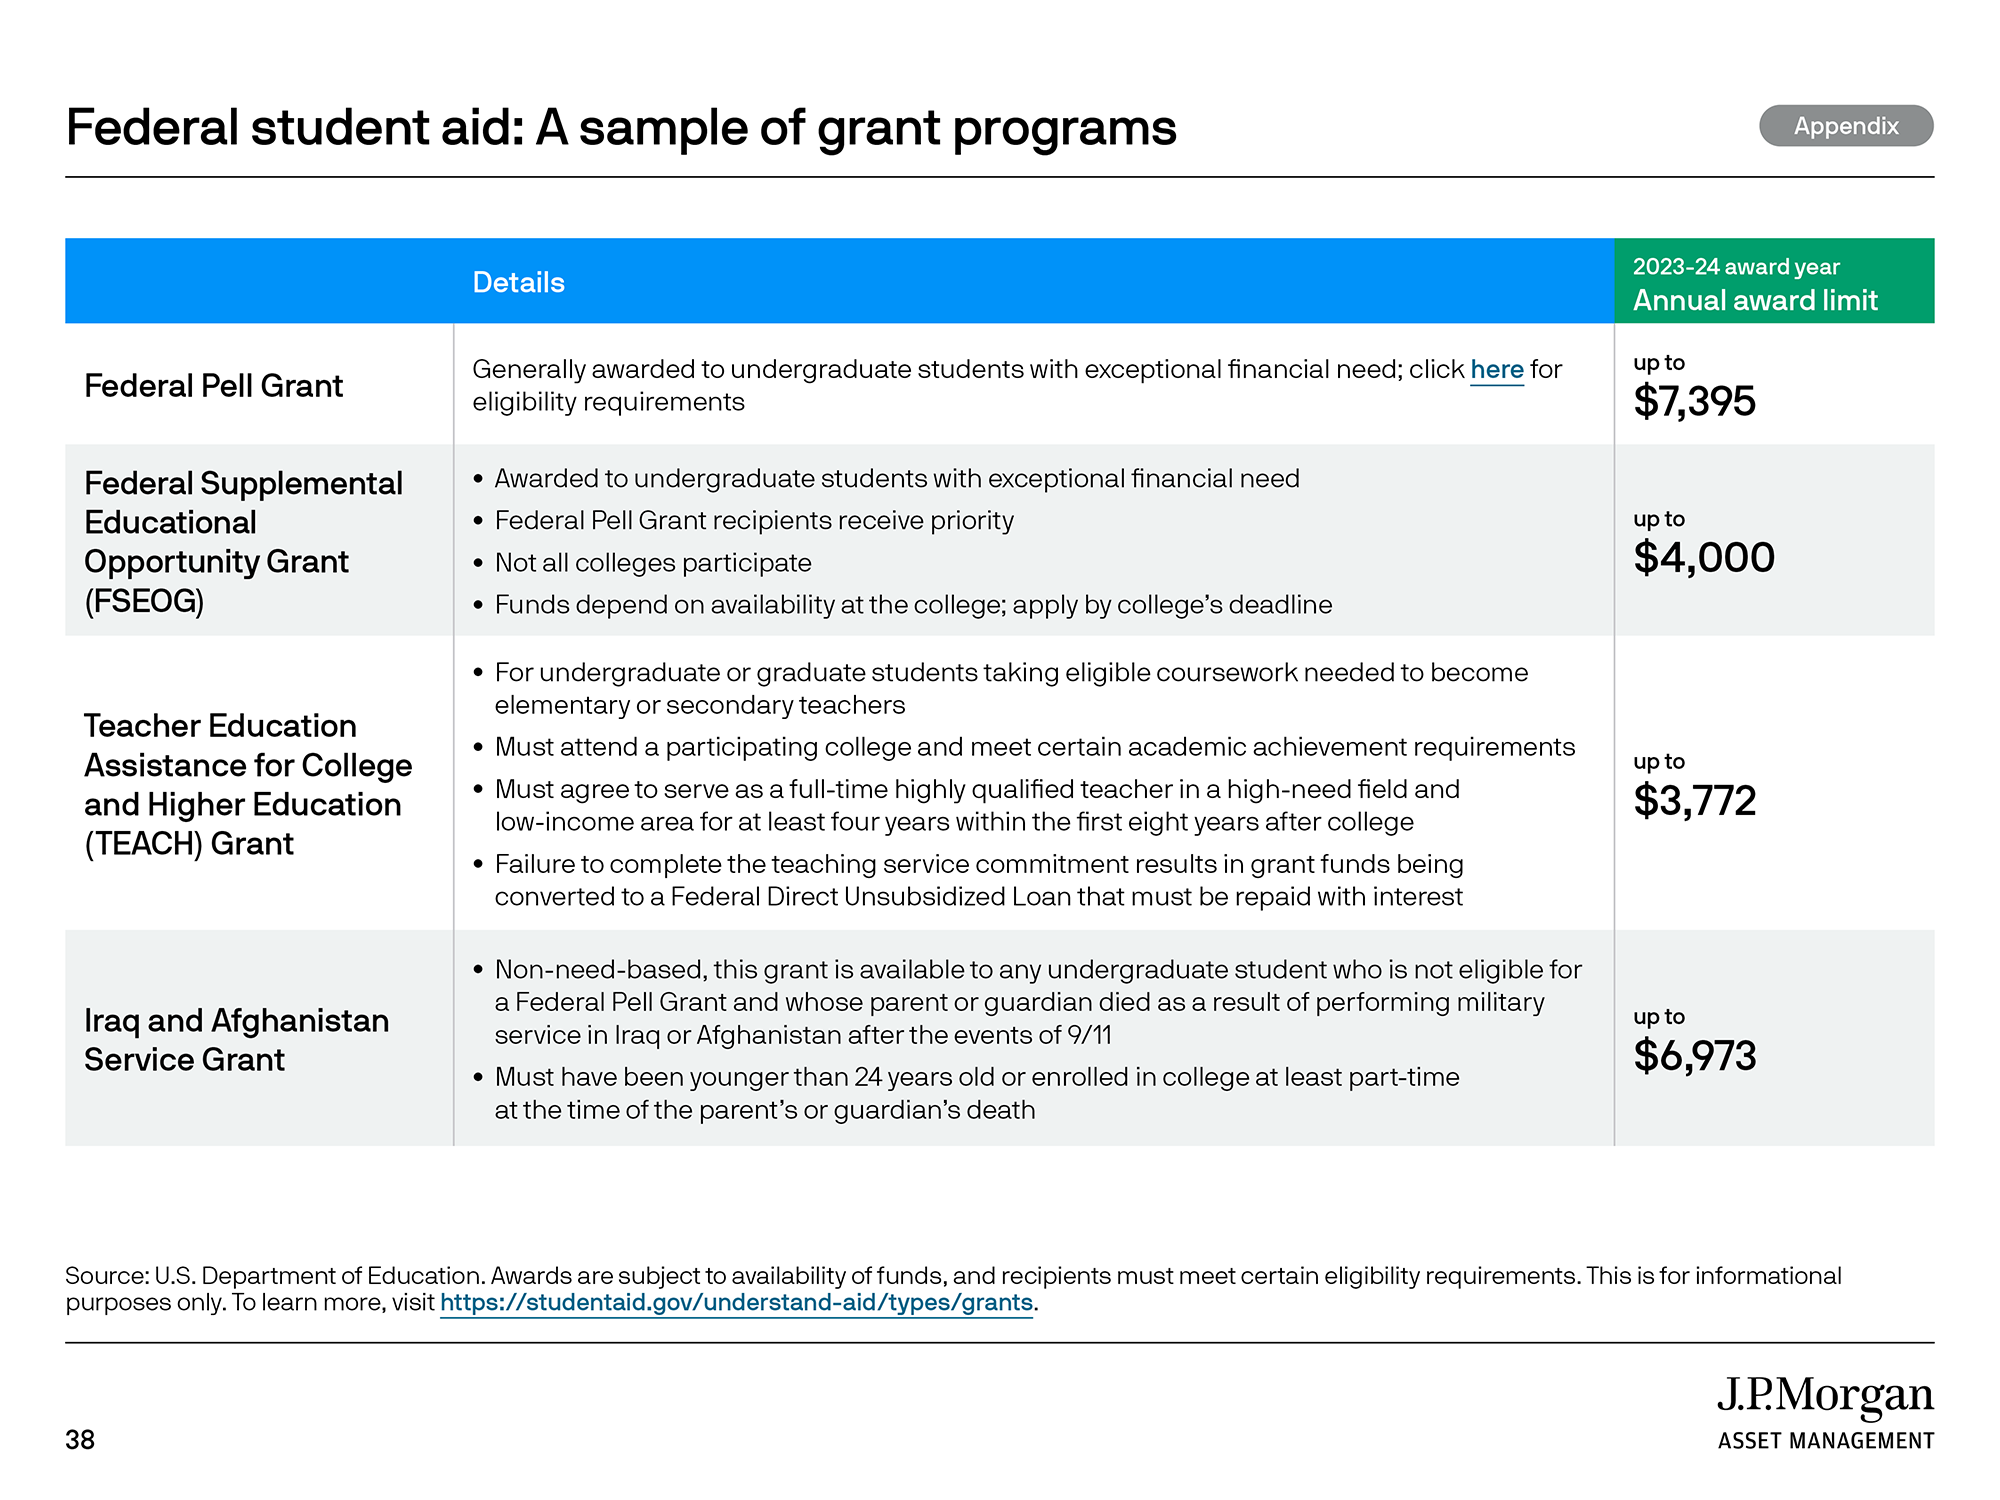 Federal student aid: A sample of grant programs